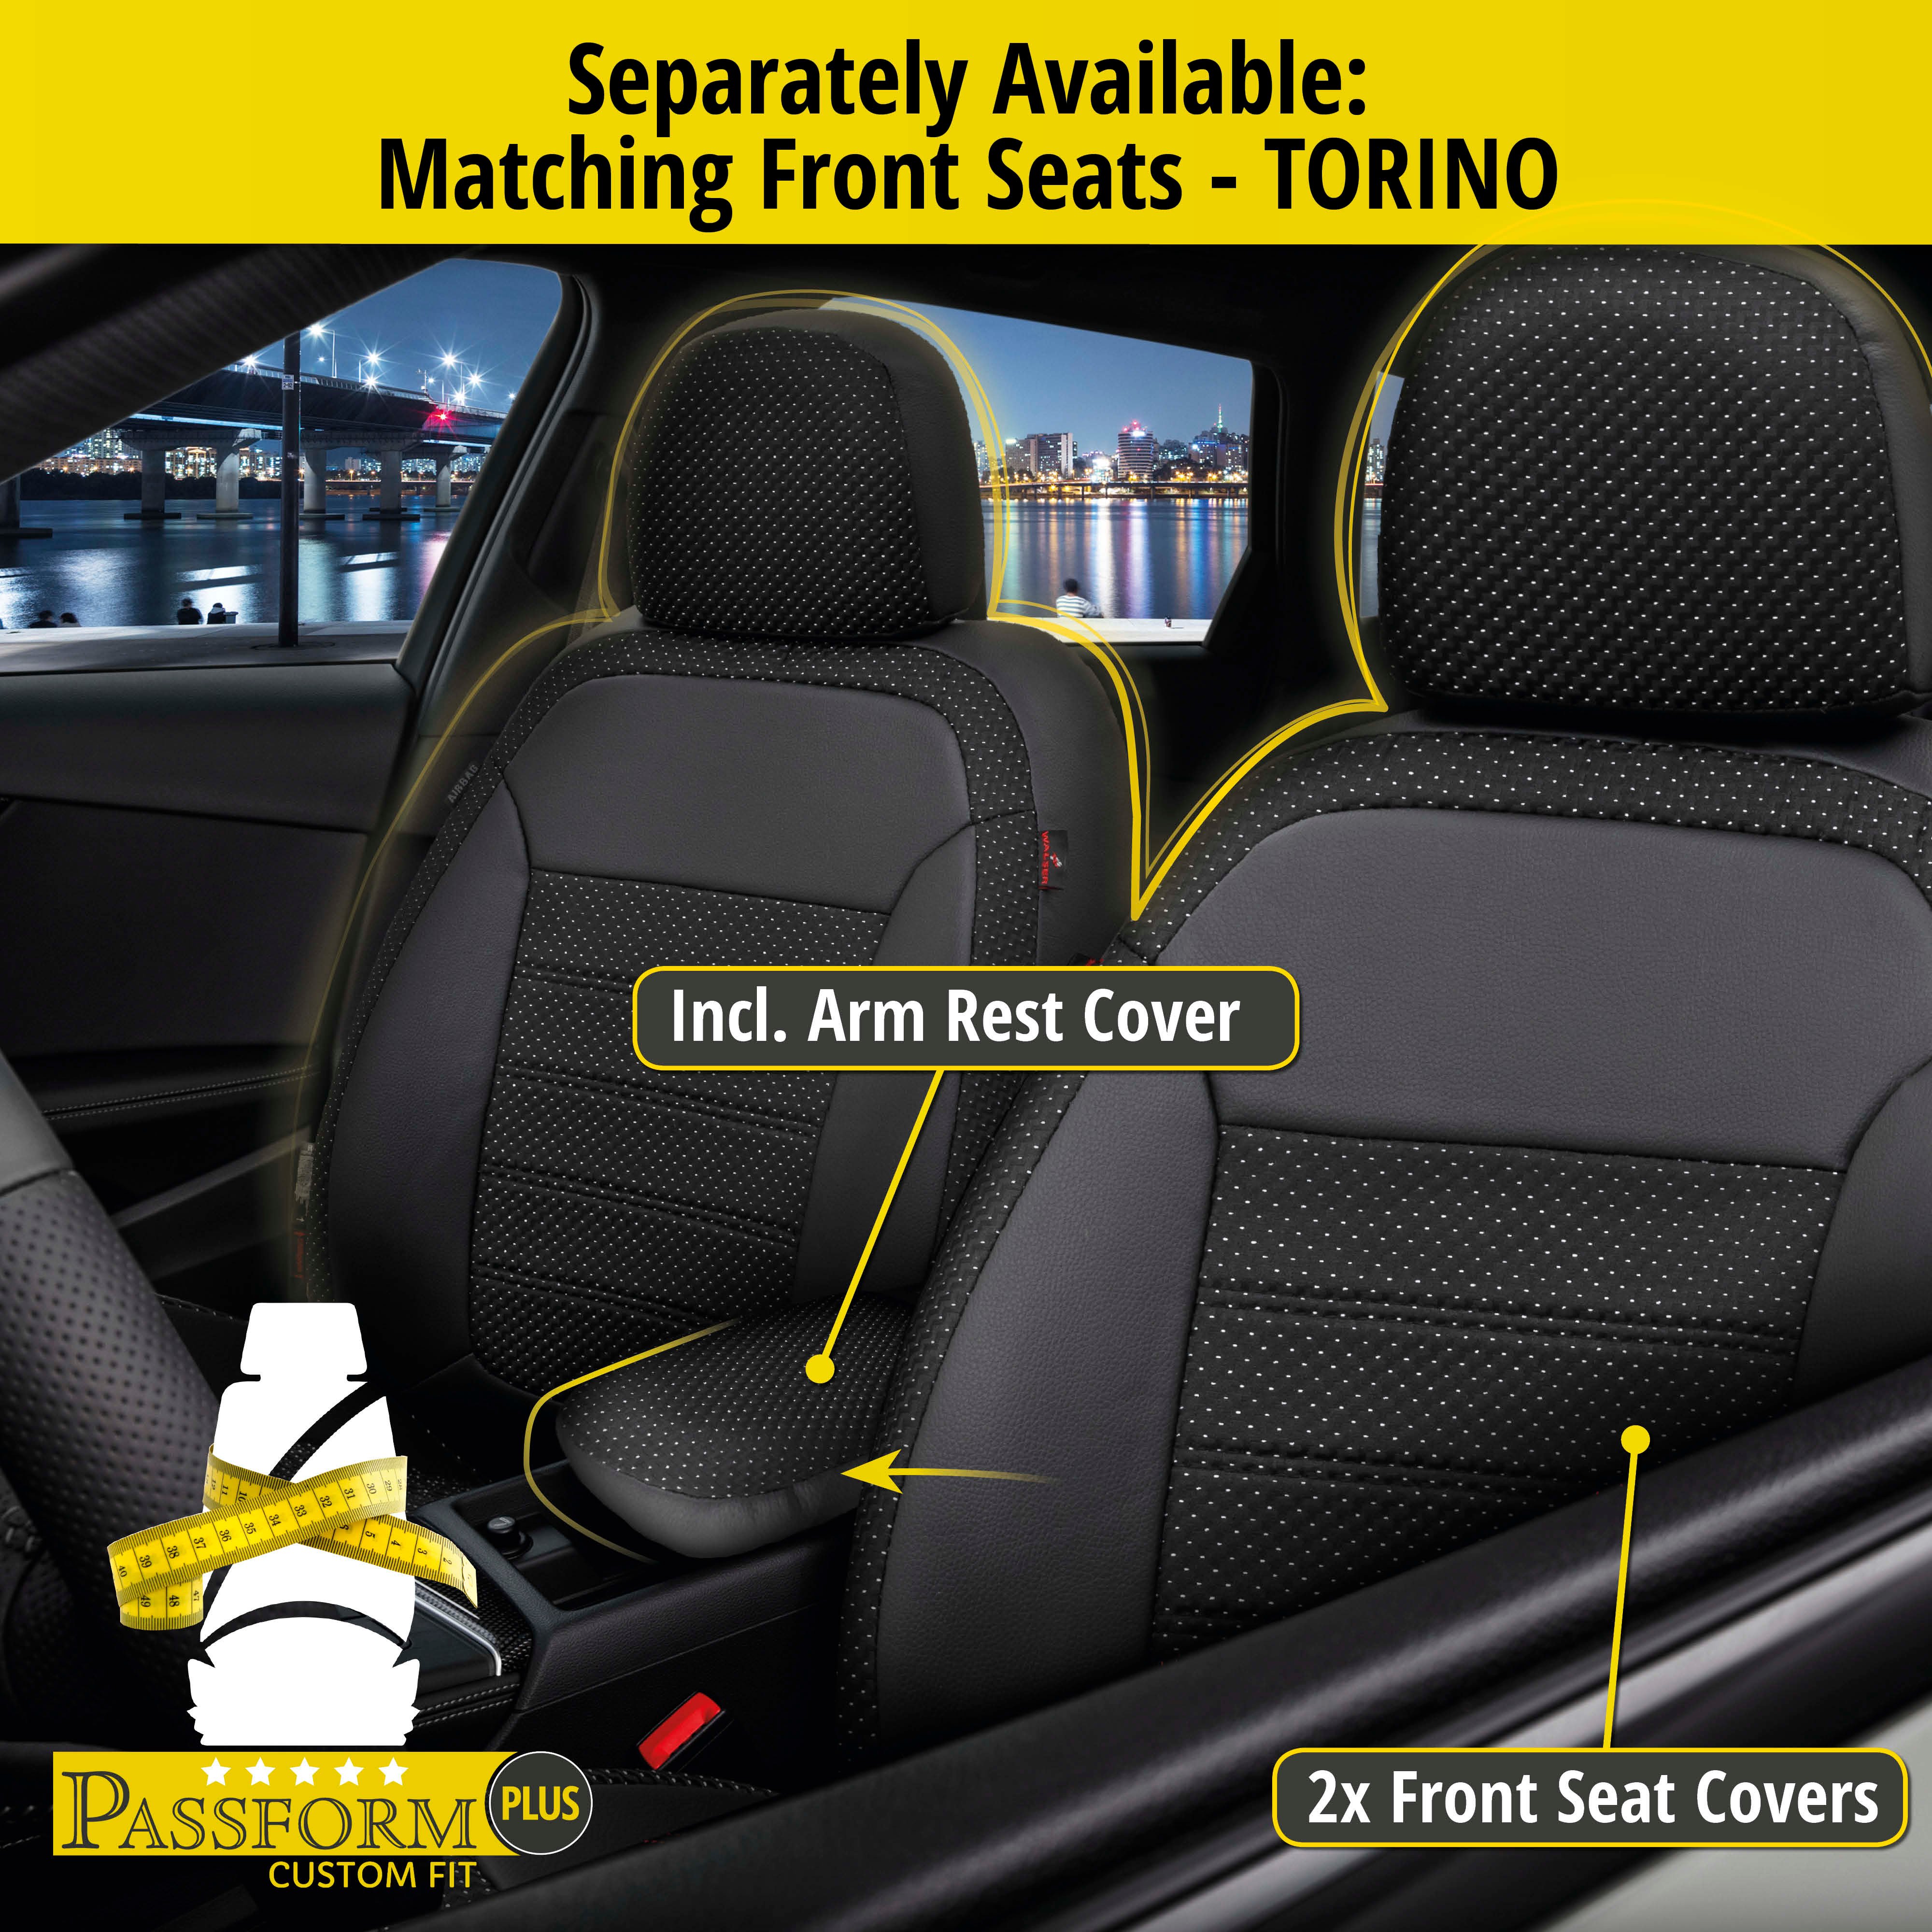 Seat cover Torino for VW Passat Comfortline 2015-Today, 1 rear seat cover for normal seats